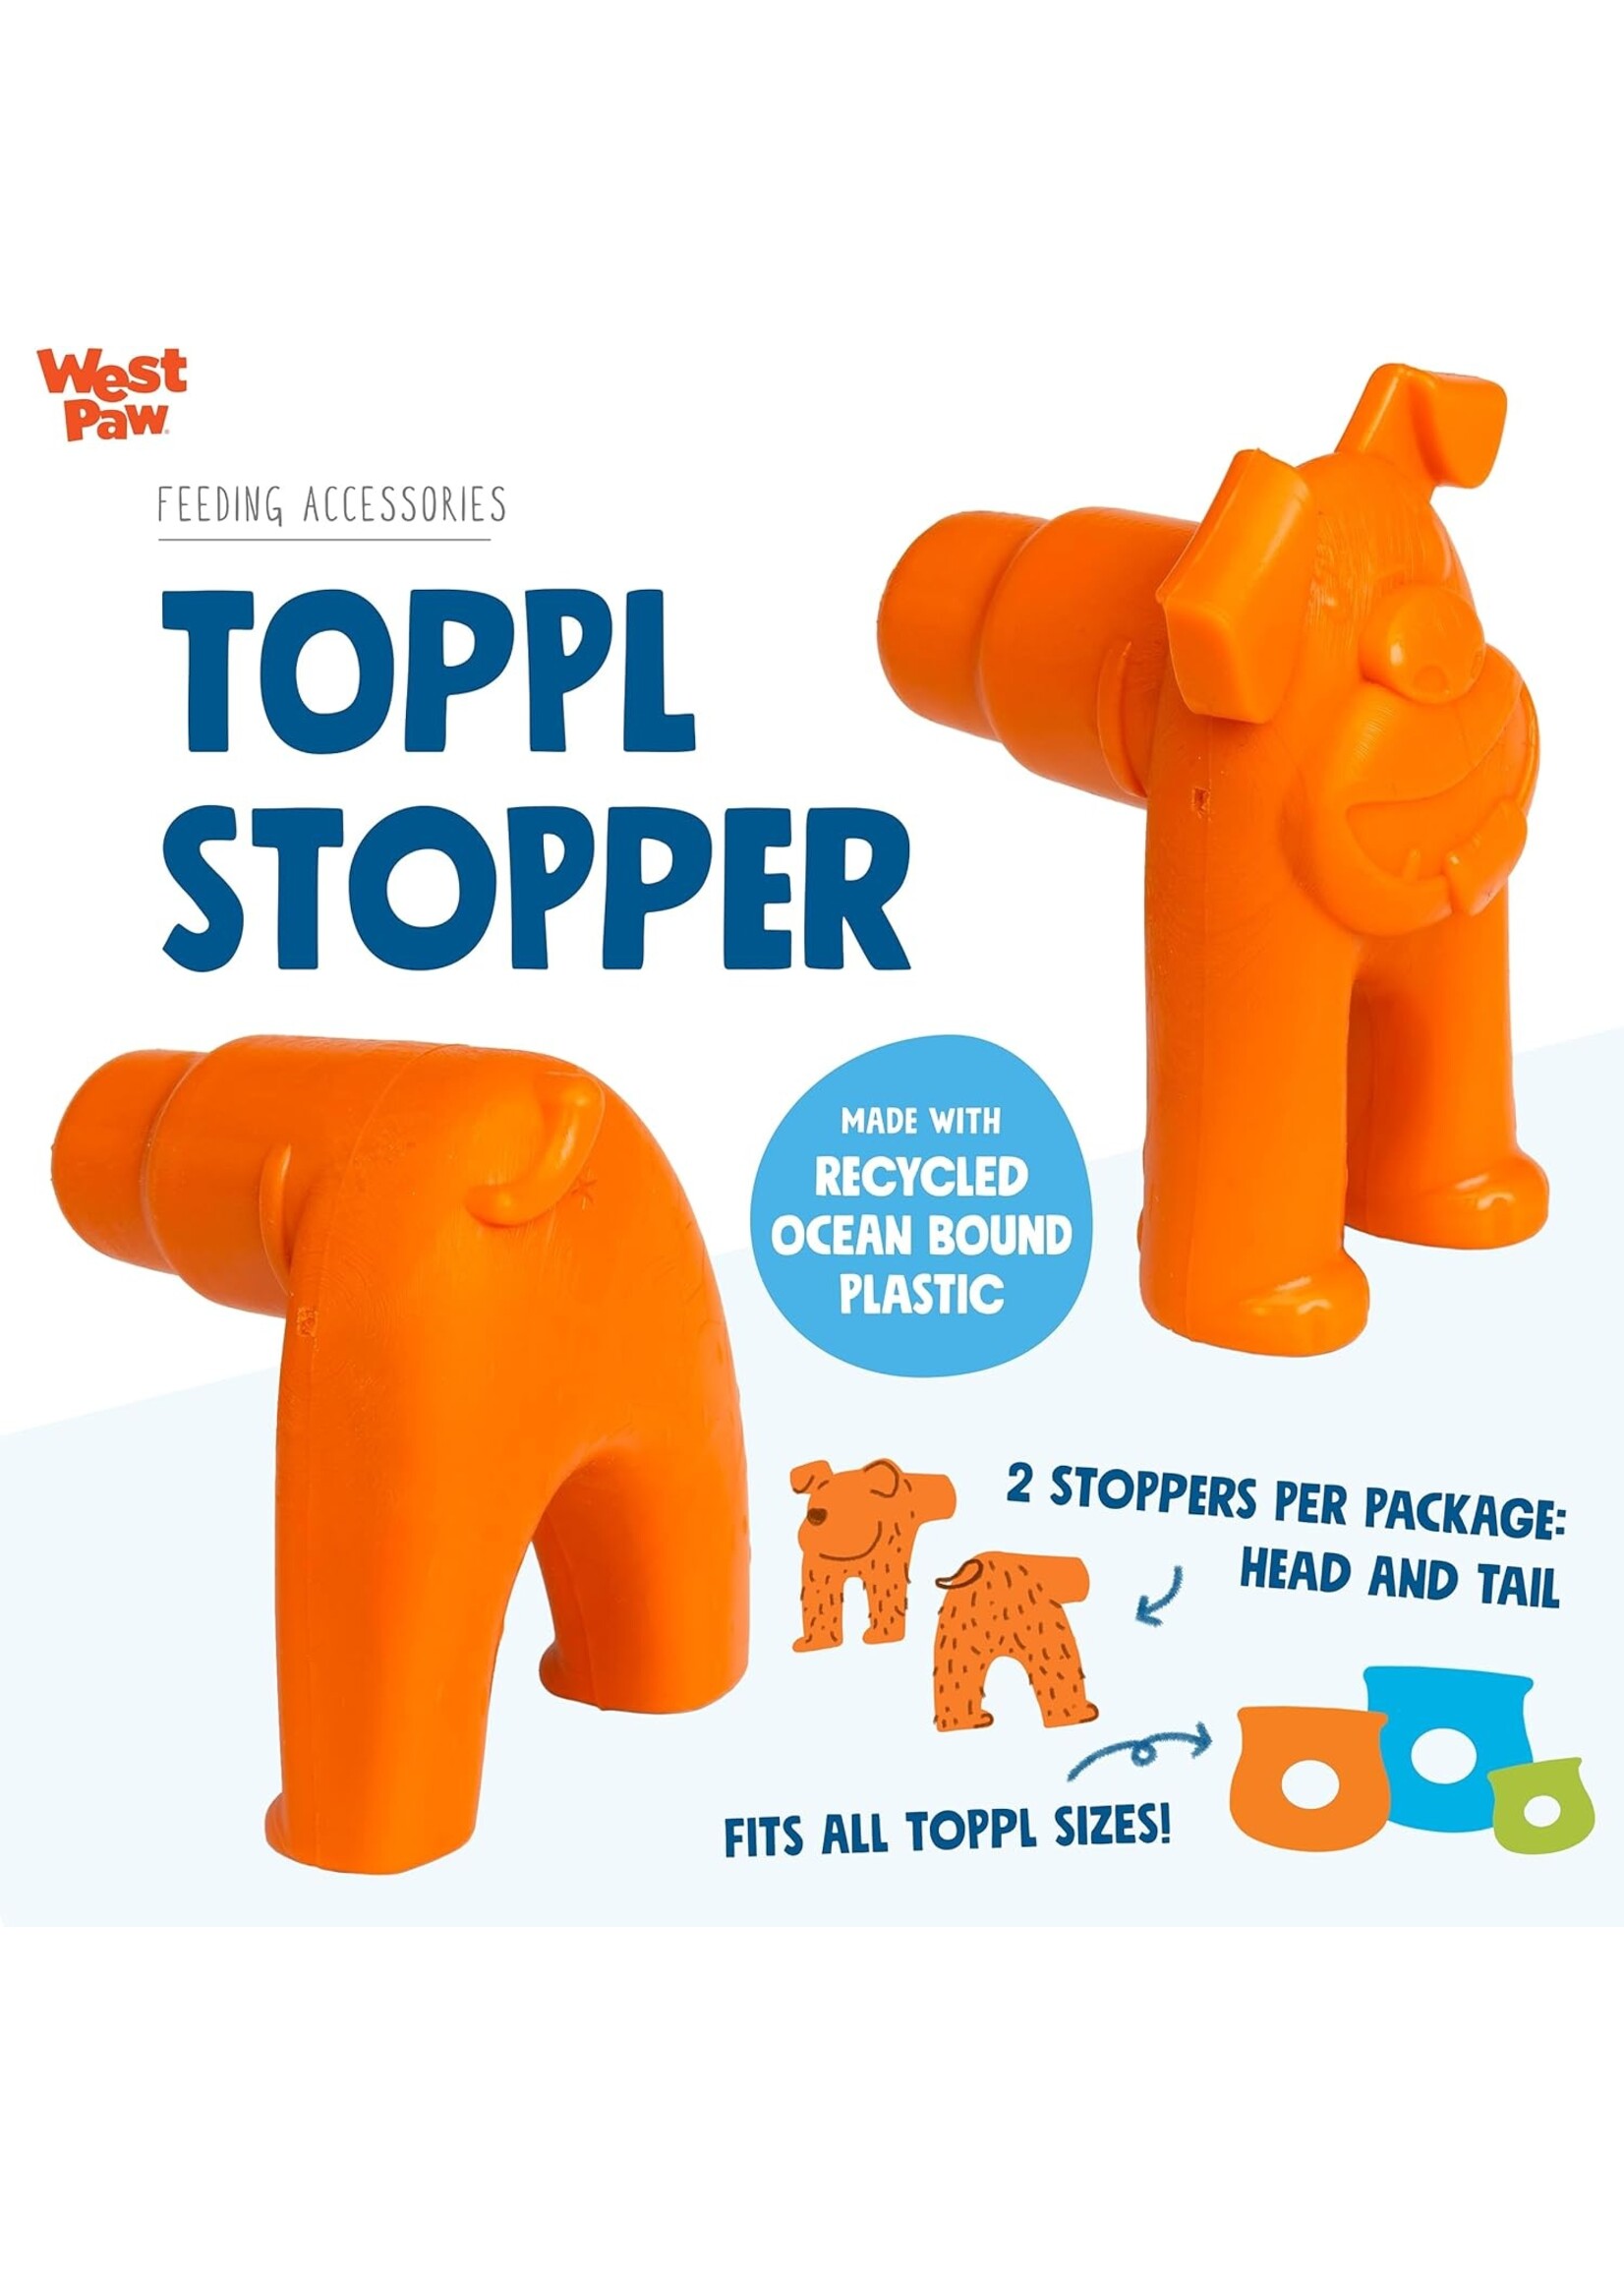 West Paw West Paw Toppl Stopper Tangerine